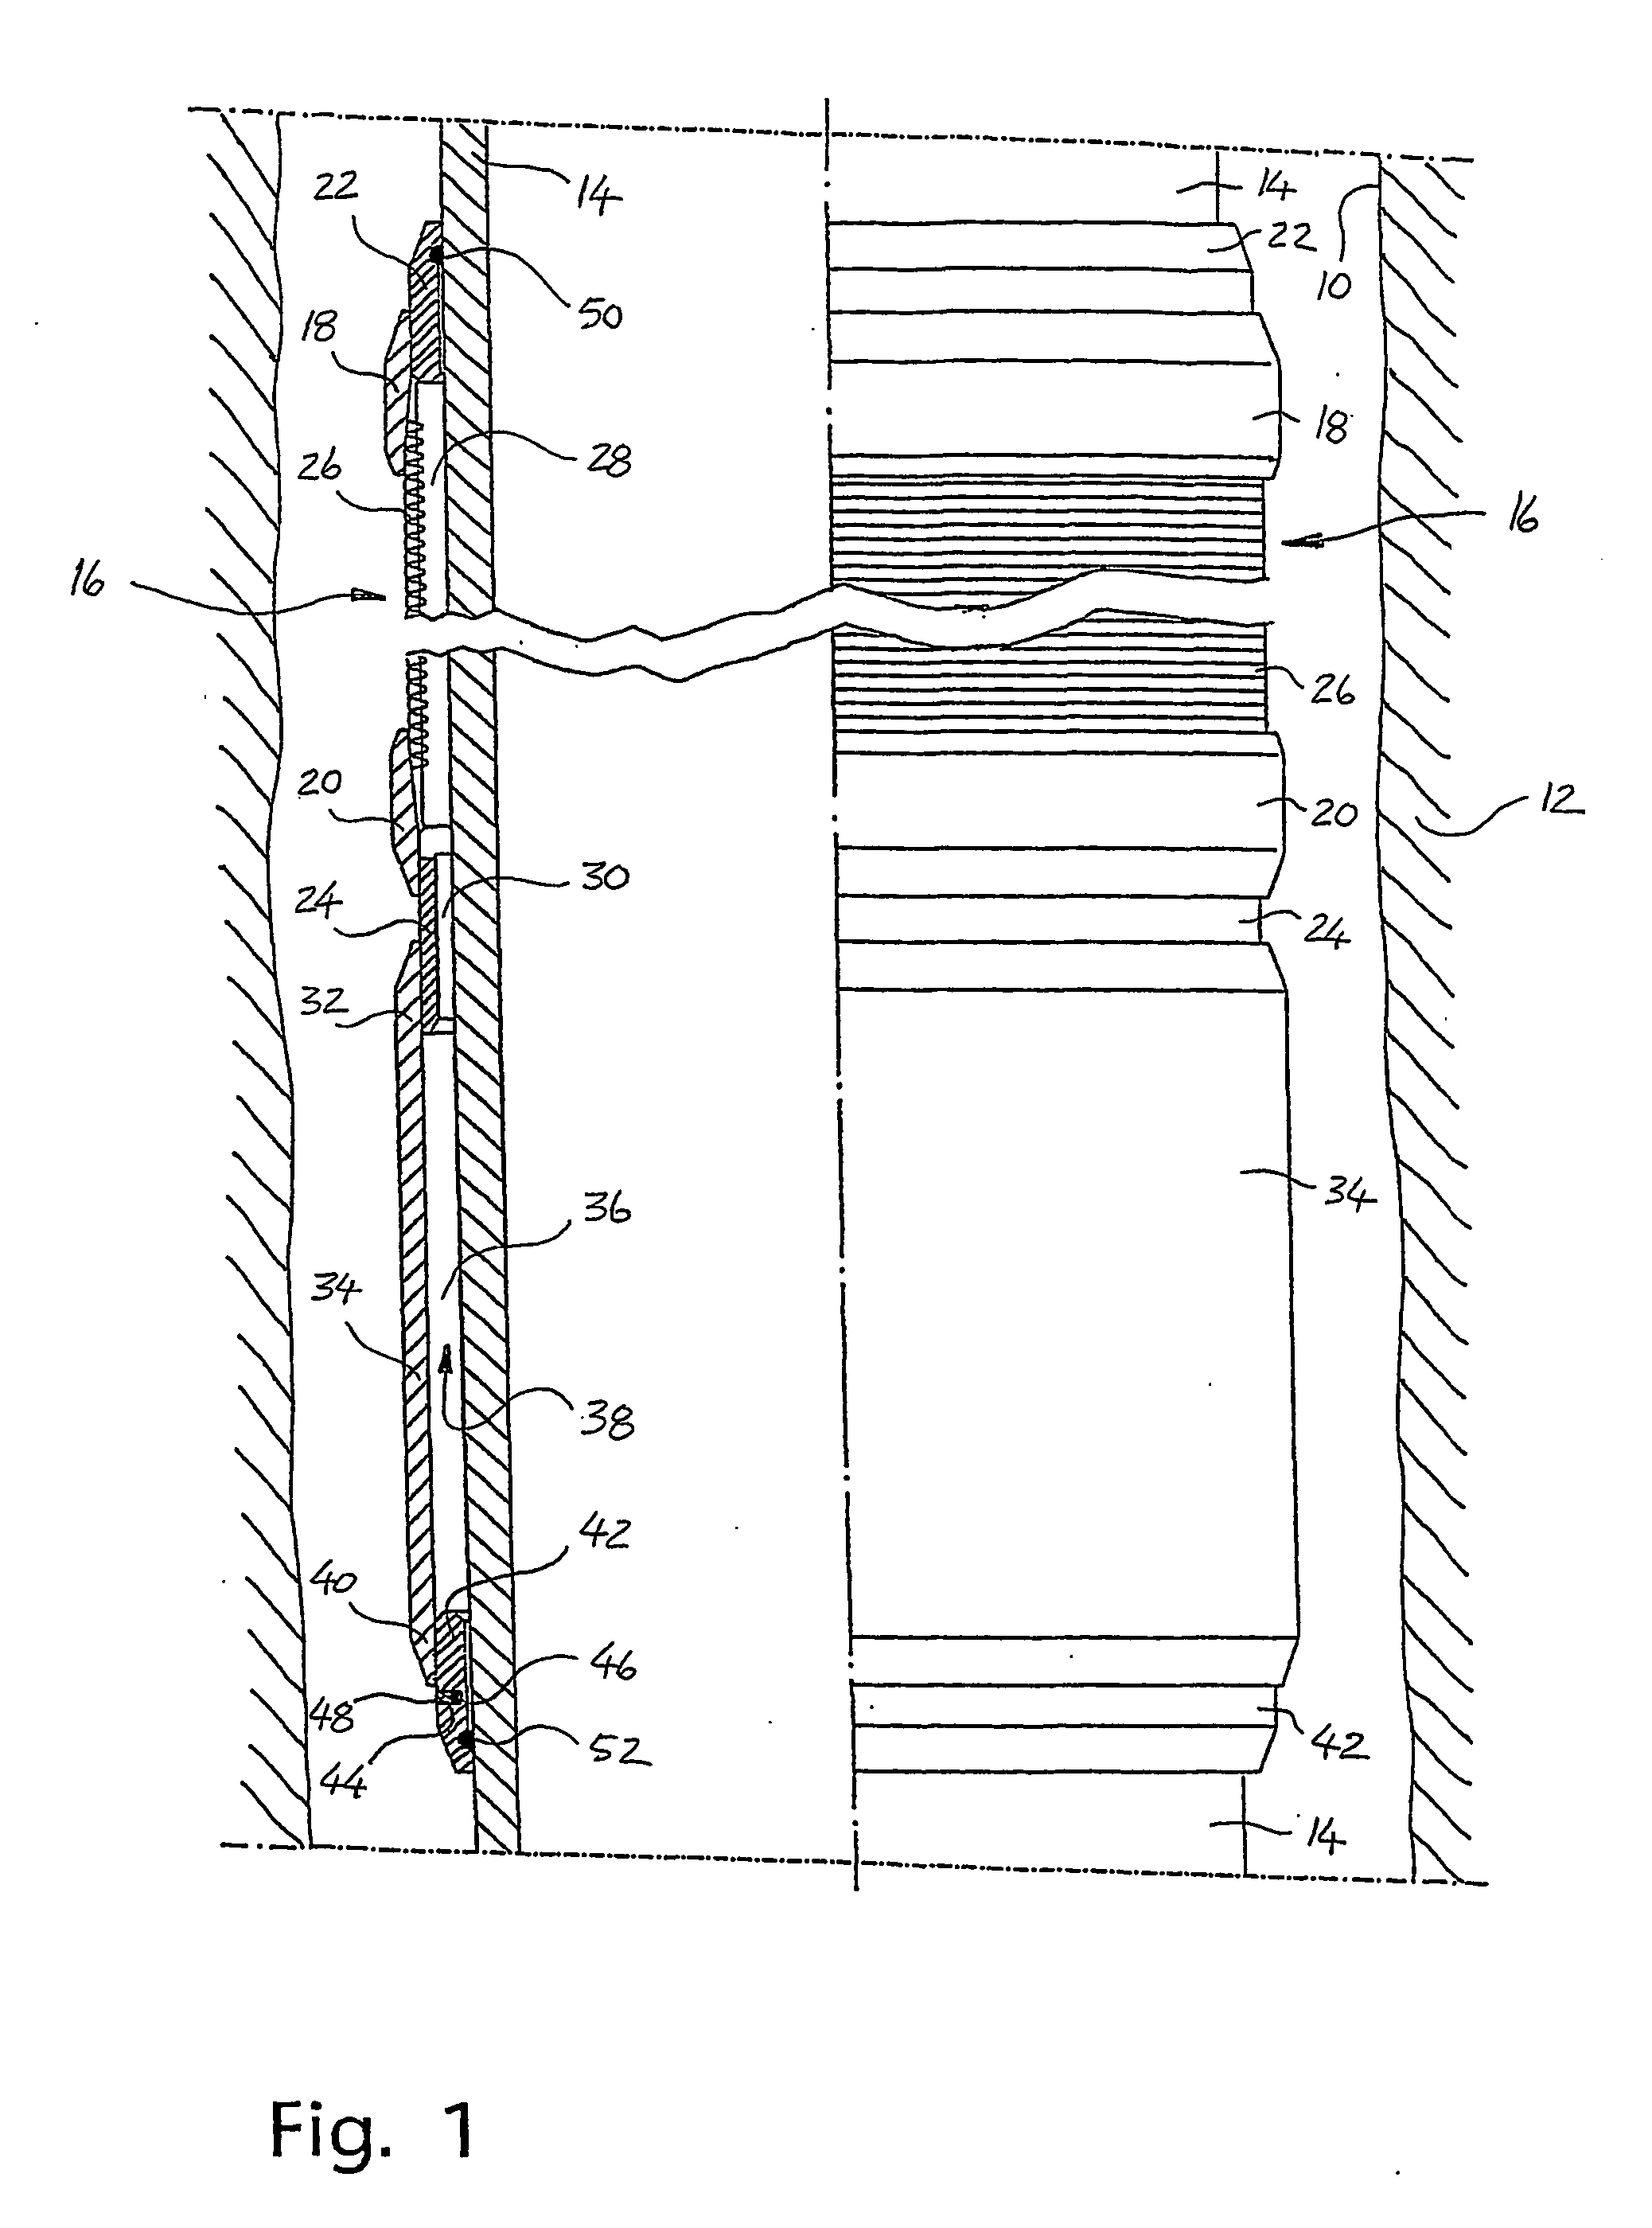 Device and a method for selective control of fluid flow between a well and surrounding rocks